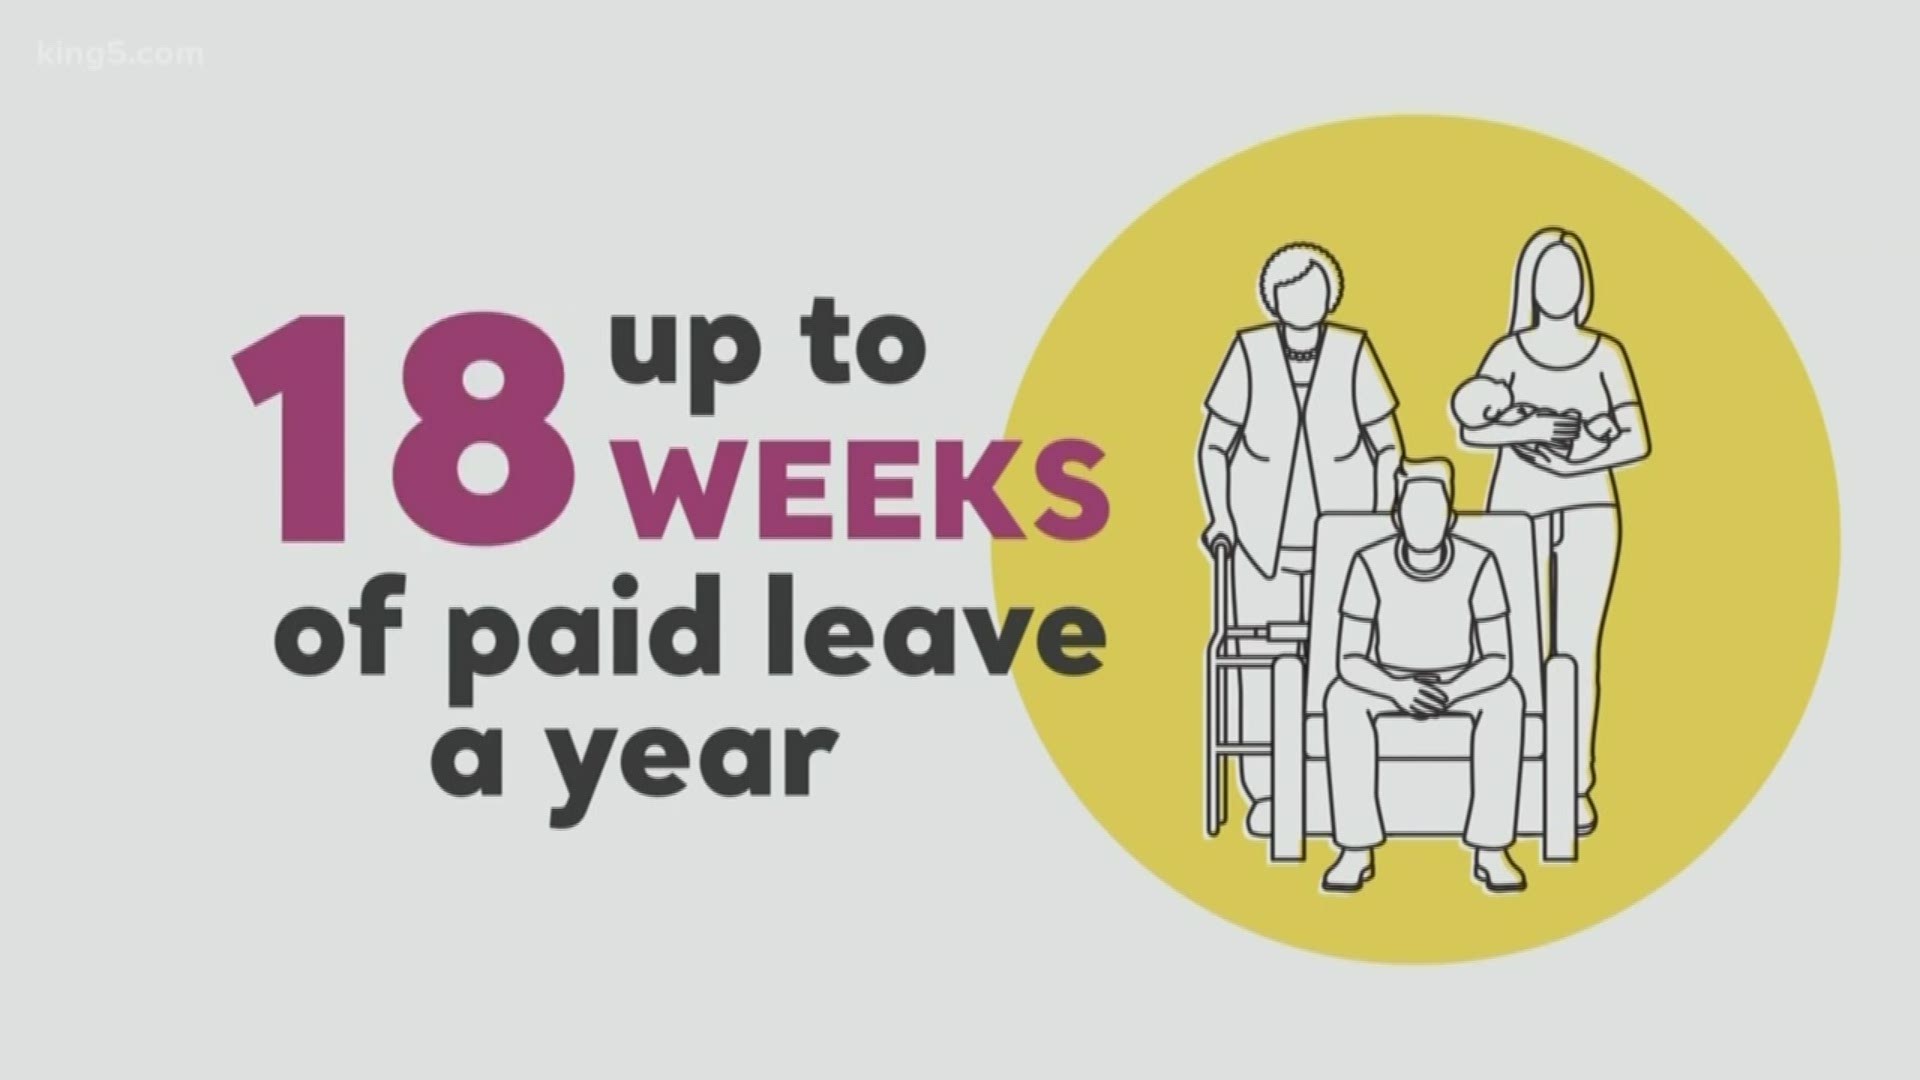 Washington is one of only 8 states in the country that offers paid leave for workers.